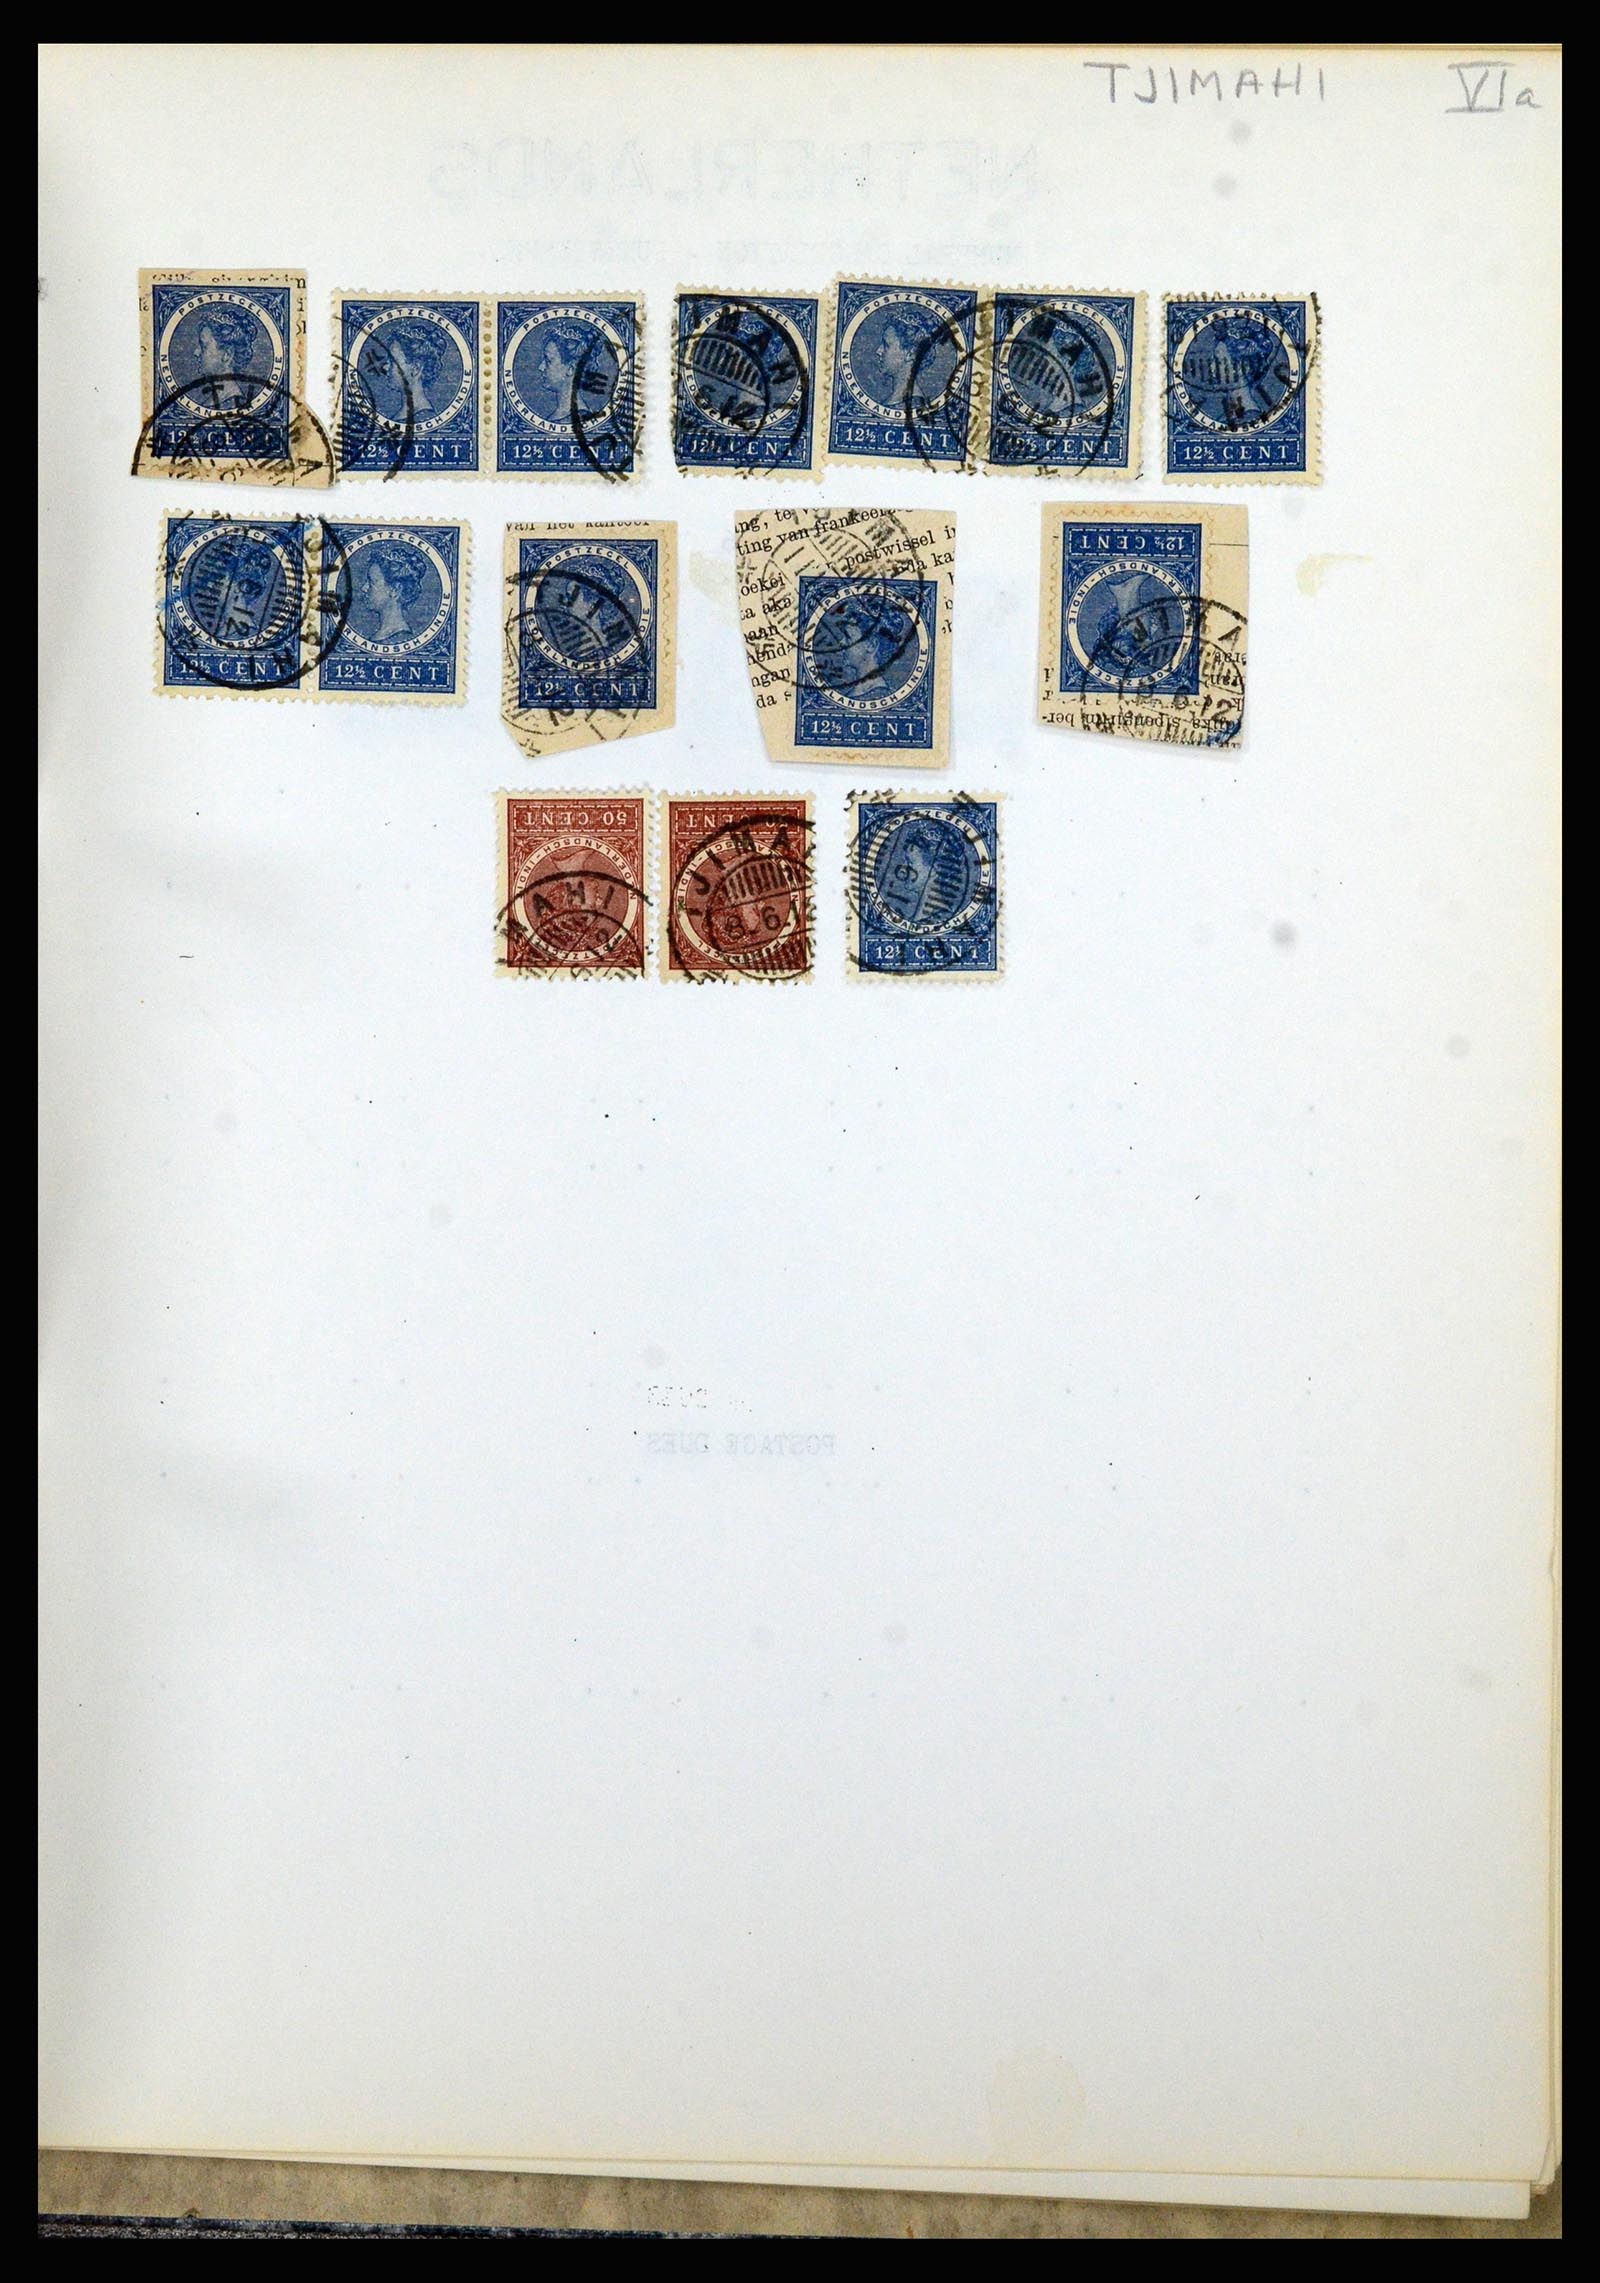 36841 175 - Stamp collection 36841 Dutch east Indies short bar cancels.